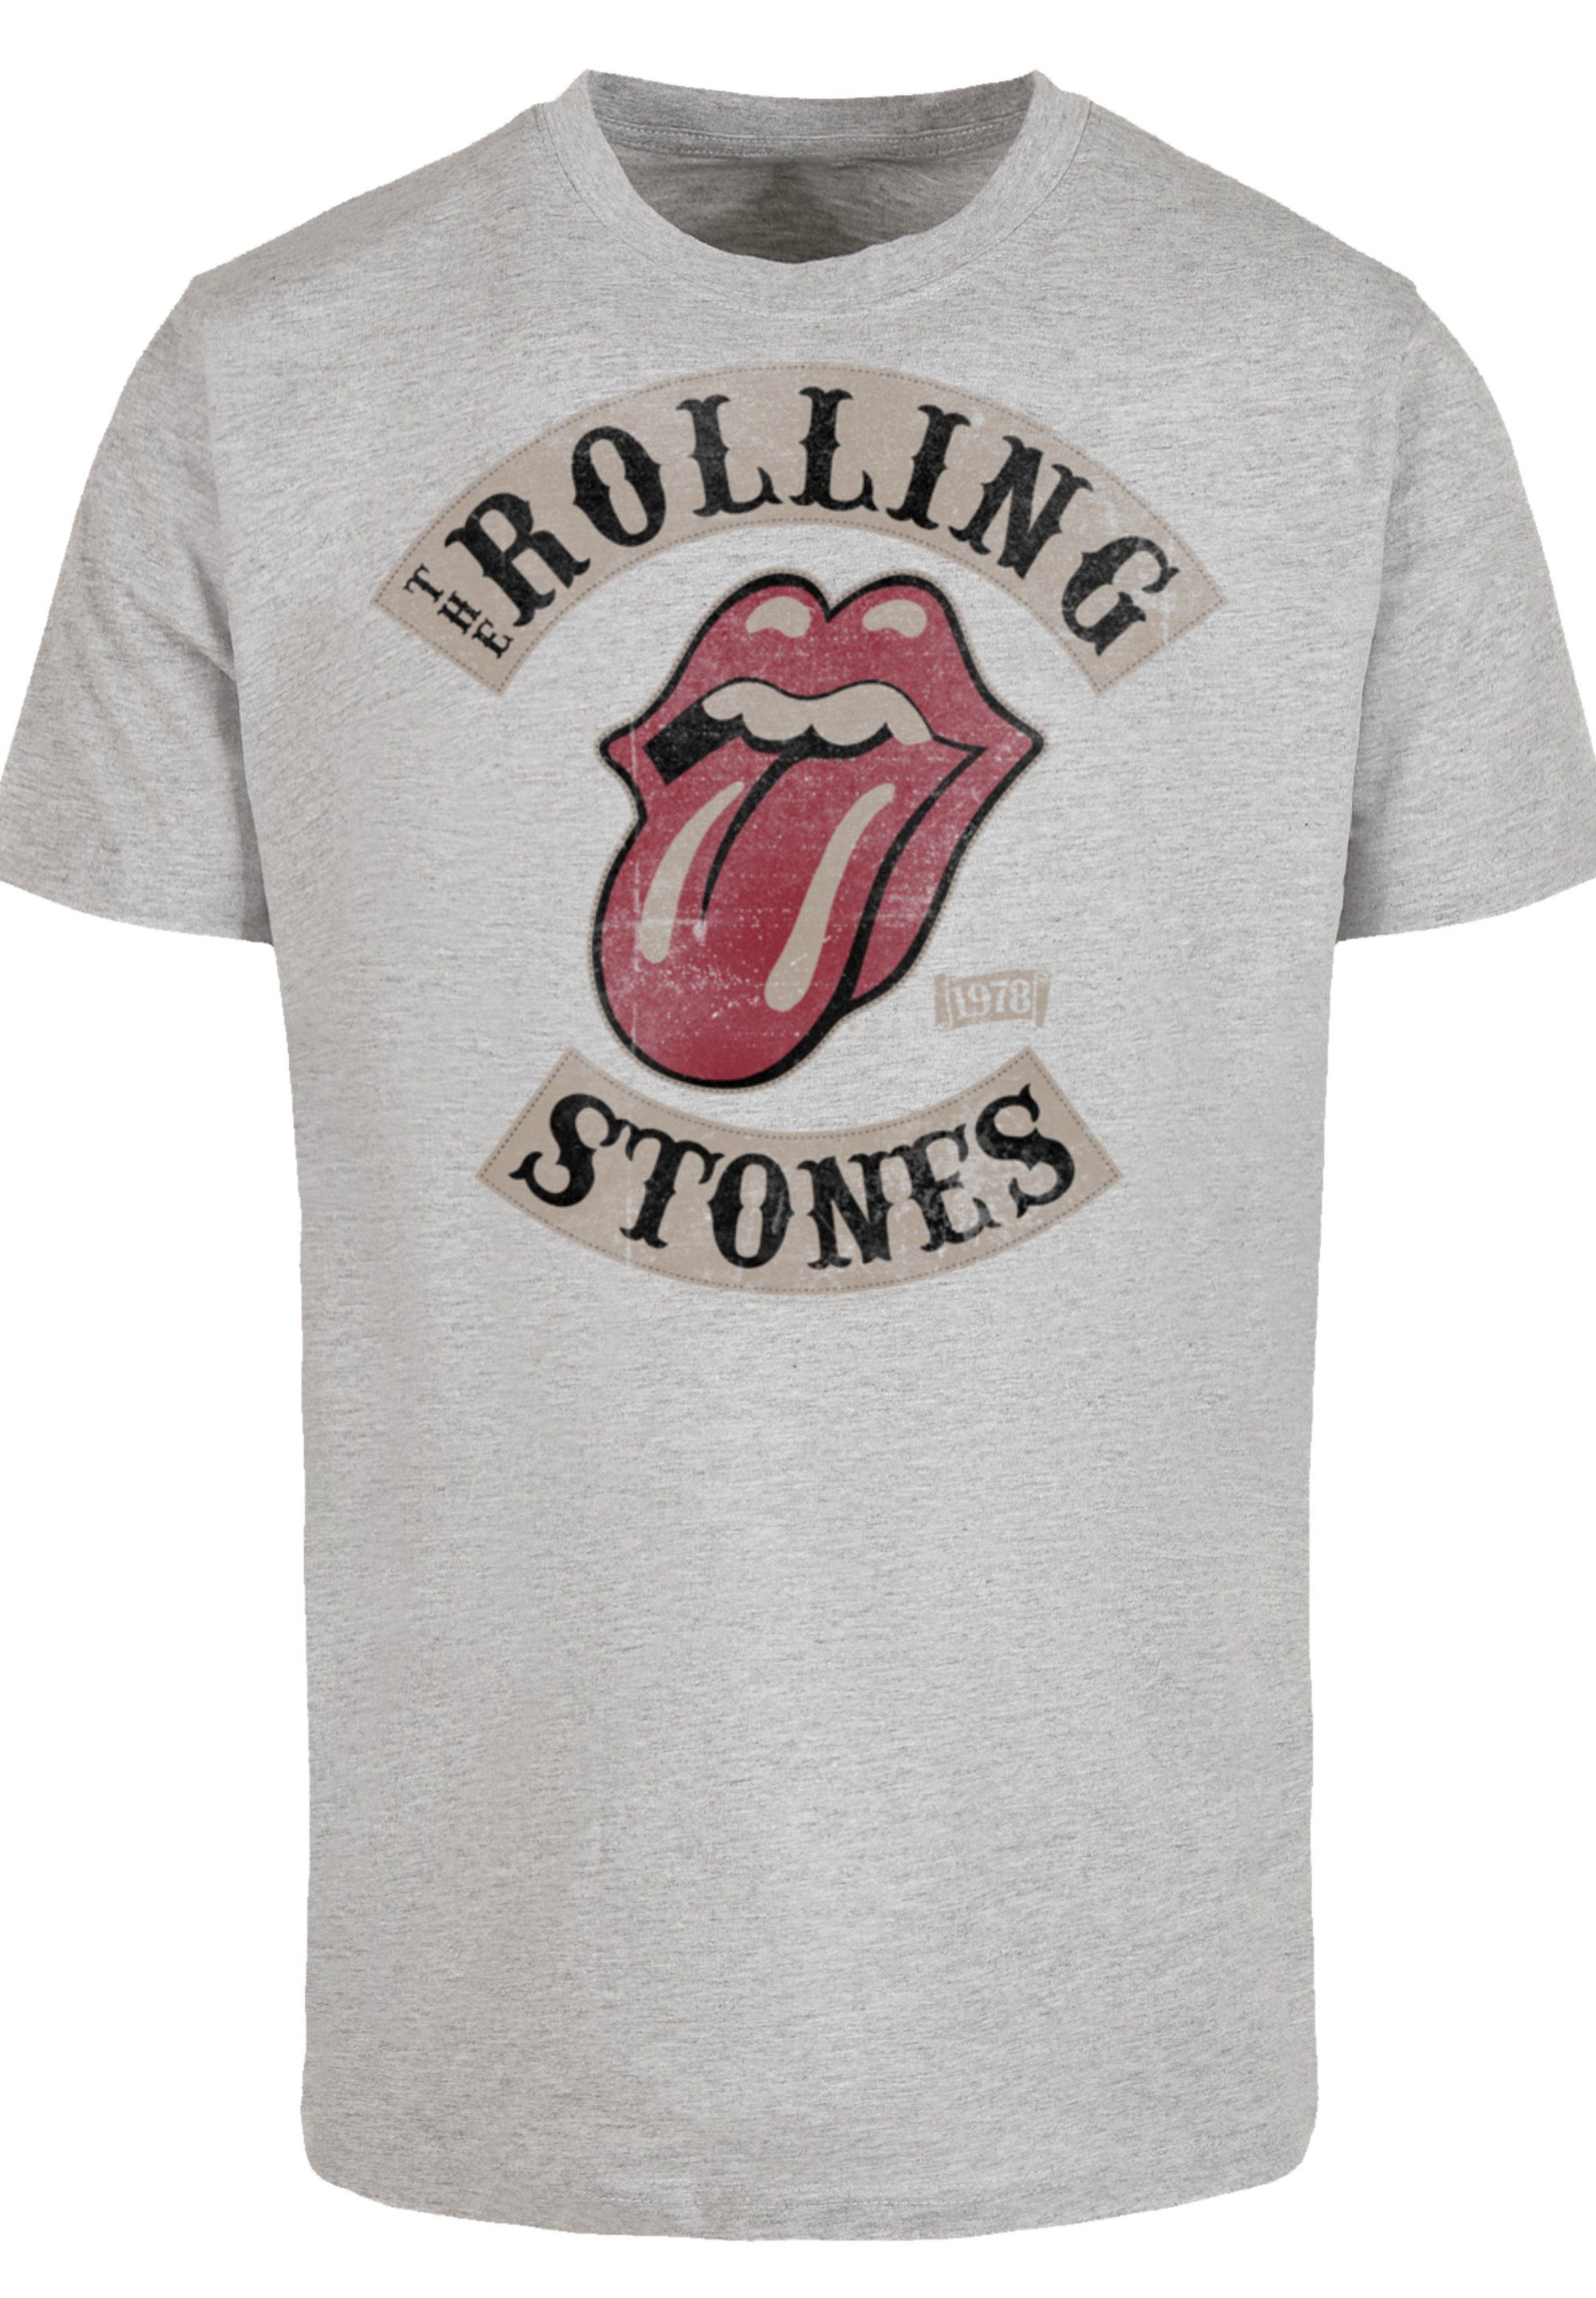 Tour The grey Stones Print F4NT4STIC '78 Rolling heather T-Shirt